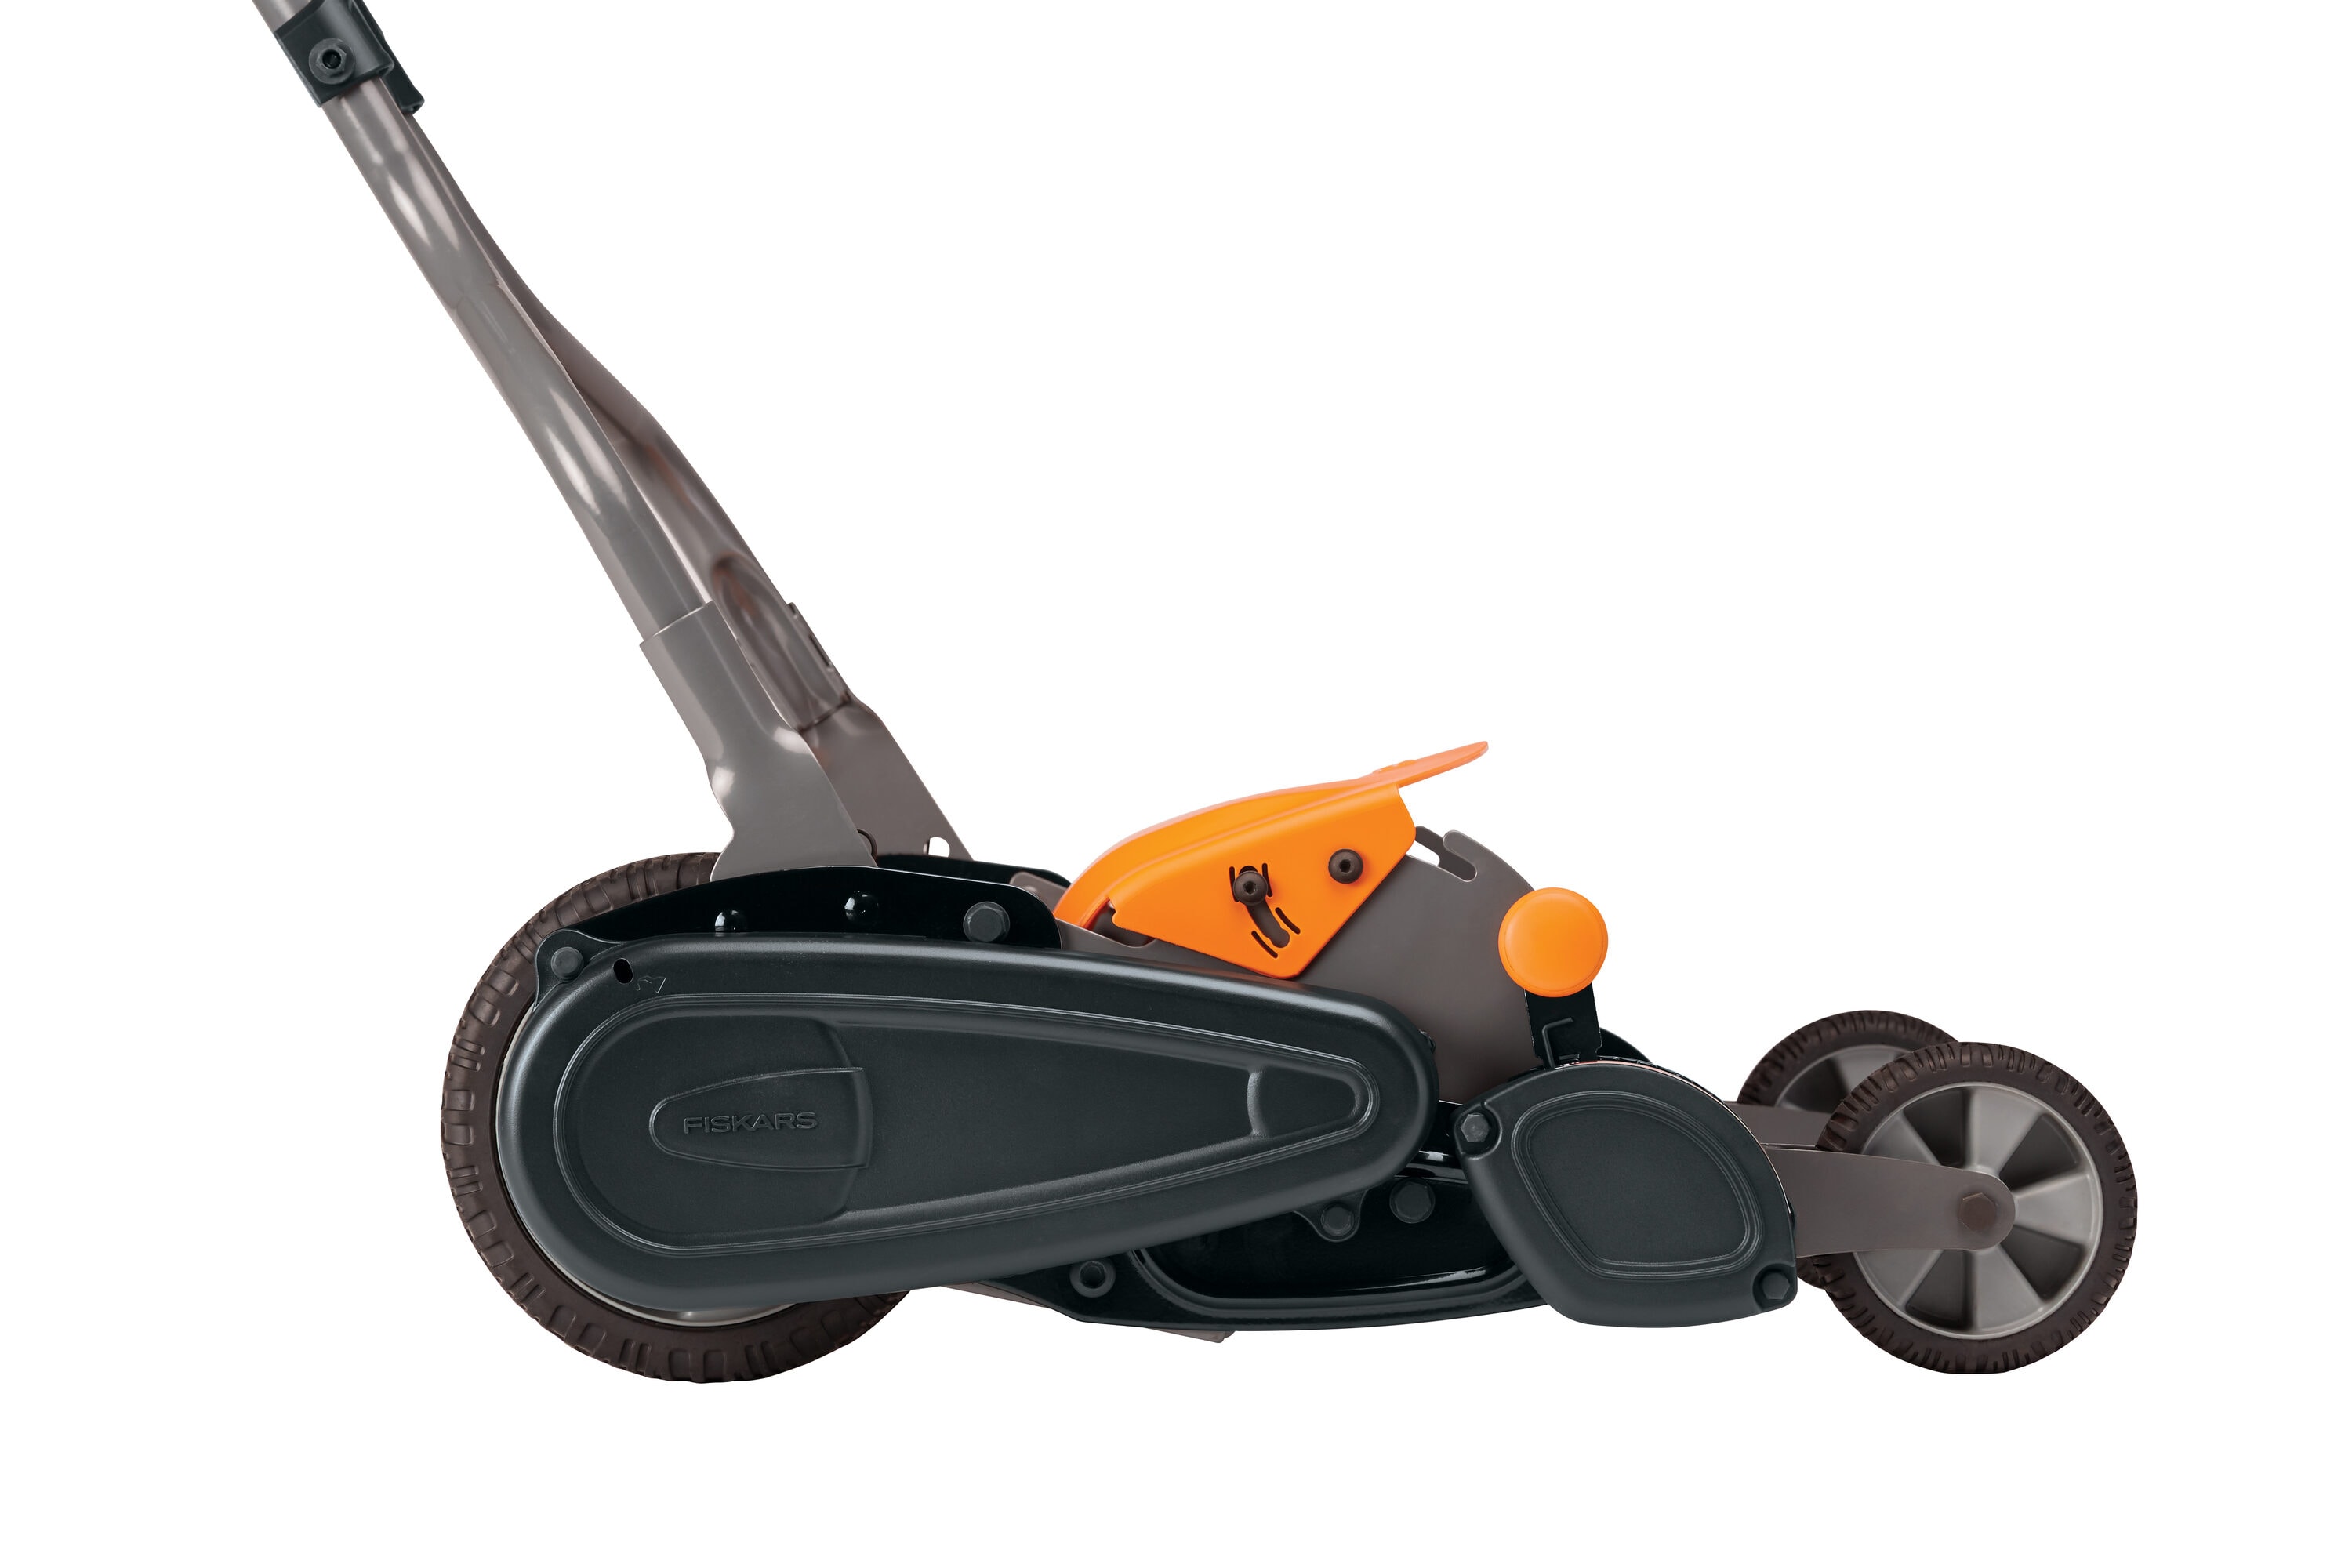 Fiskars Reel Mower Review, The Good and The Bad 